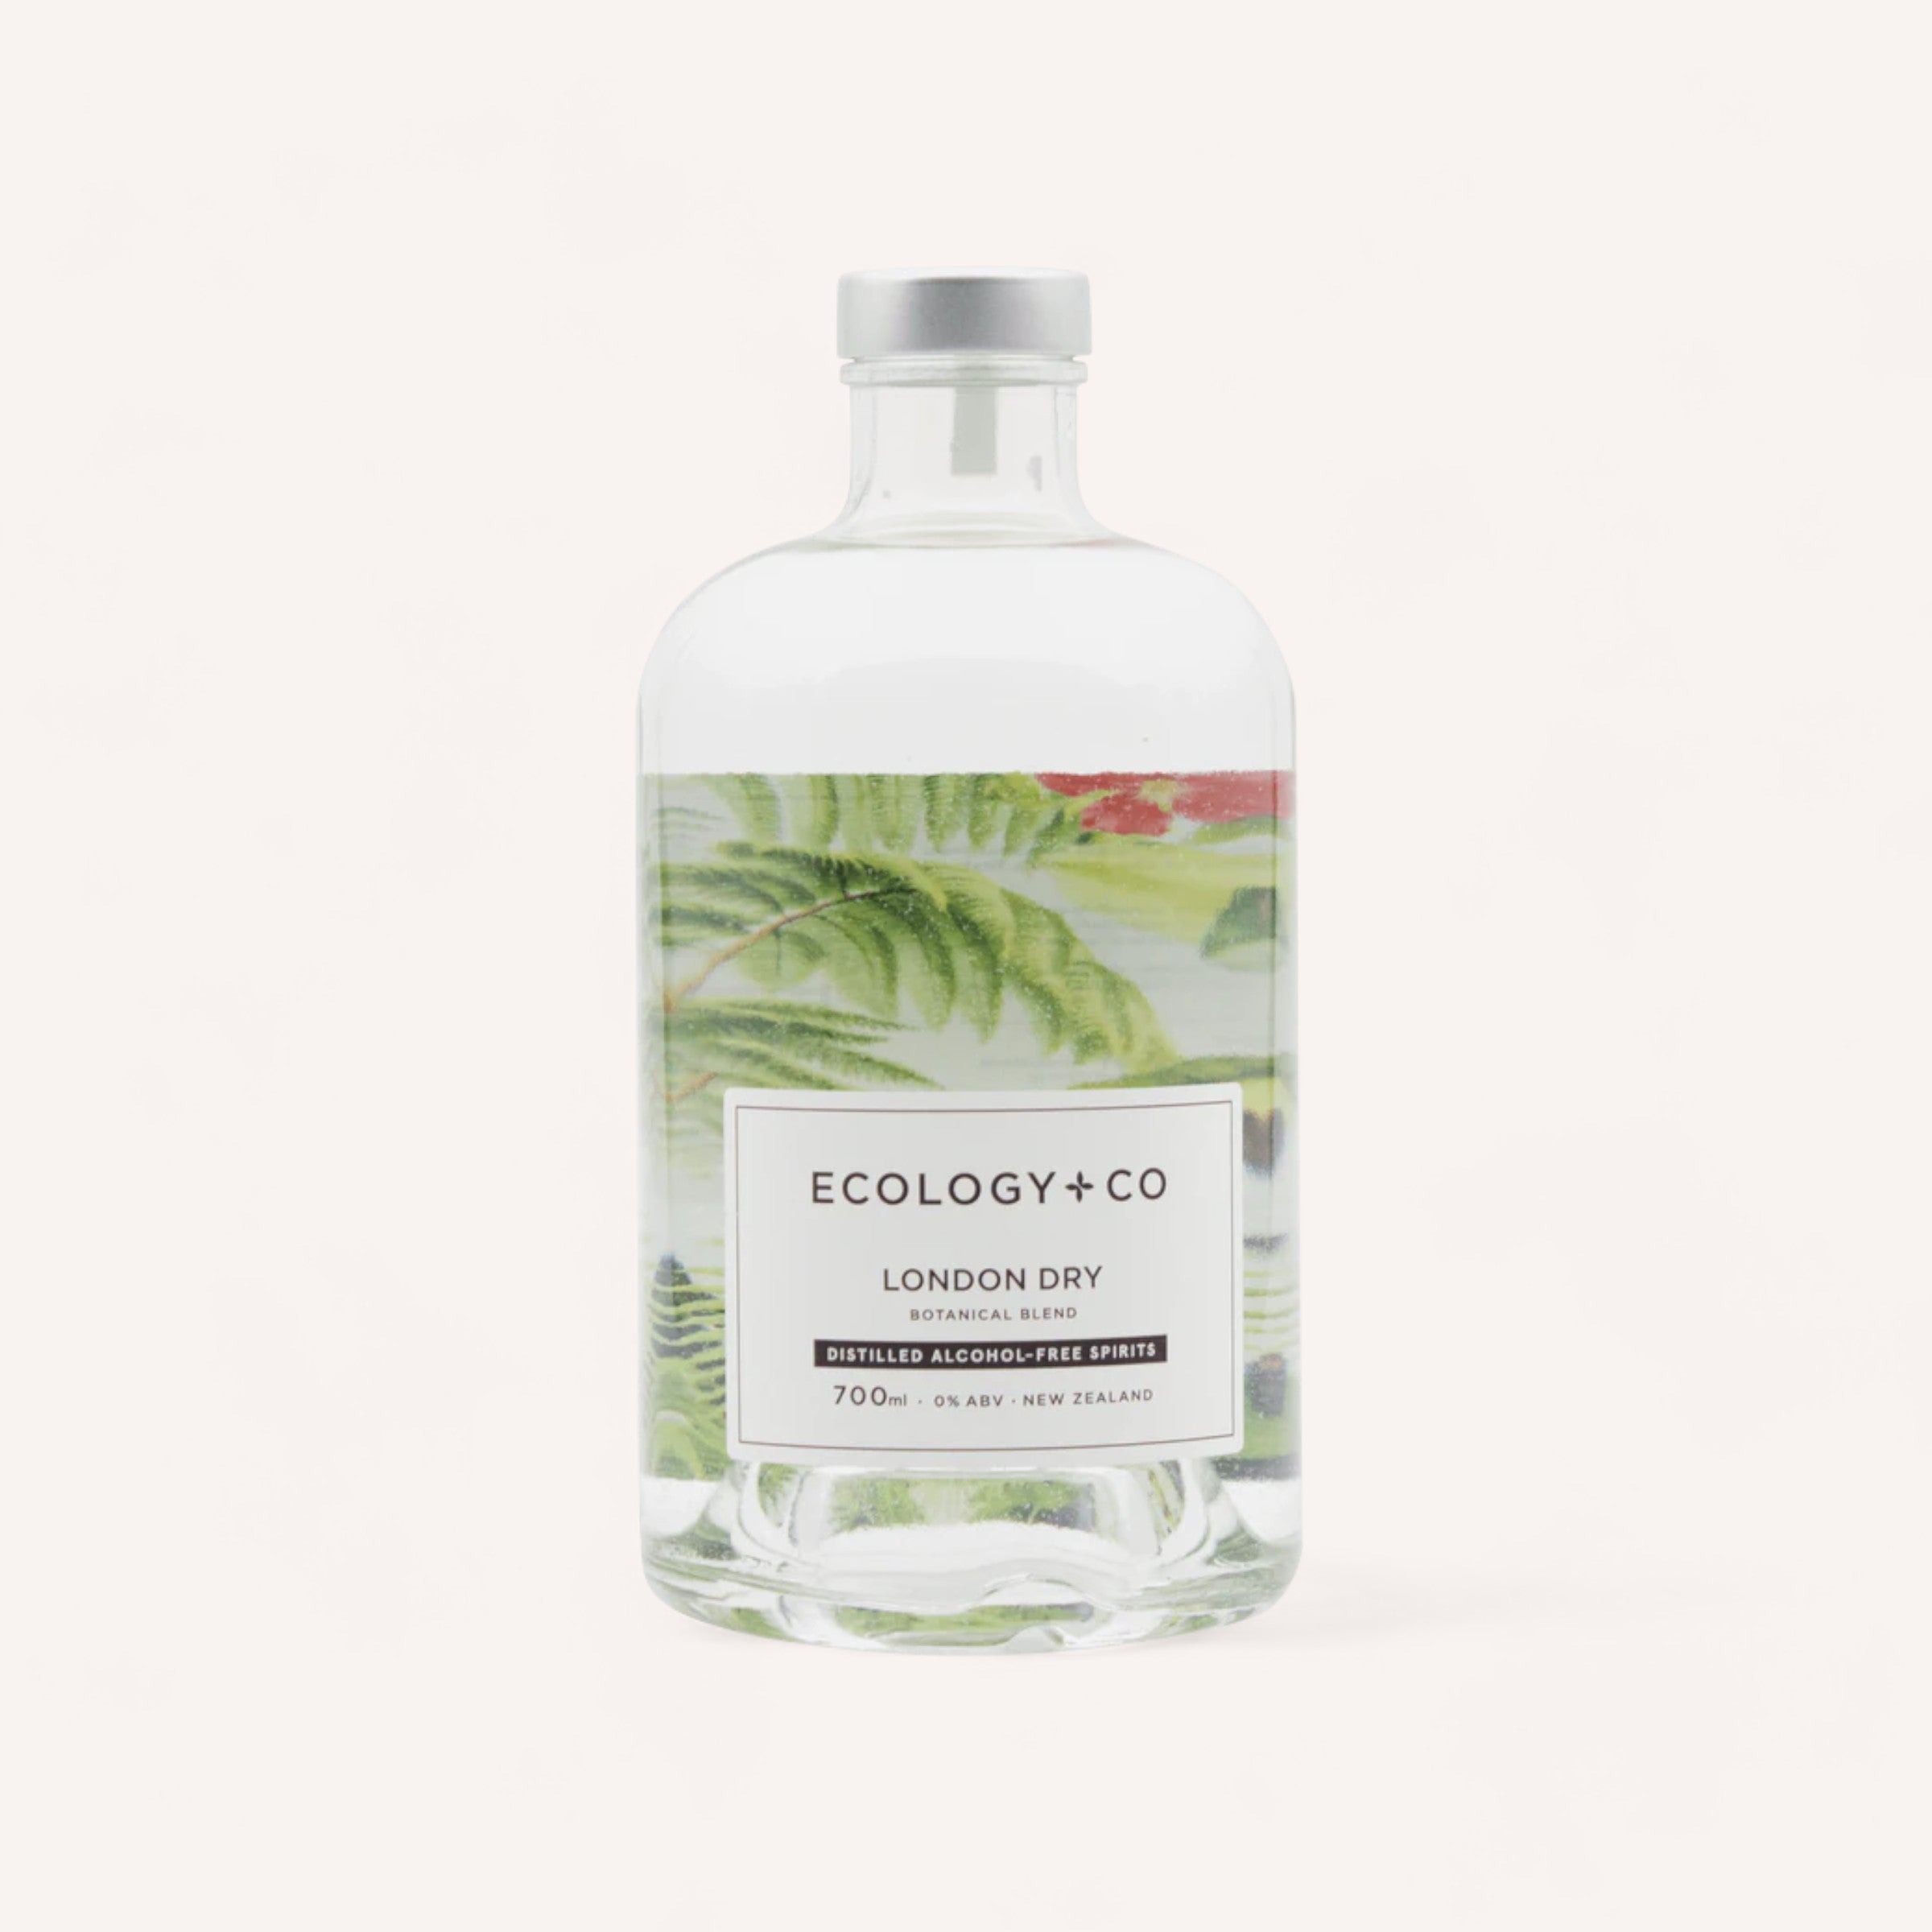 A clear glass bottle of Ecology & Co London Dry Zero Alcohol Gin against a white background, with a hint of green botanical artwork visible behind the liquid.